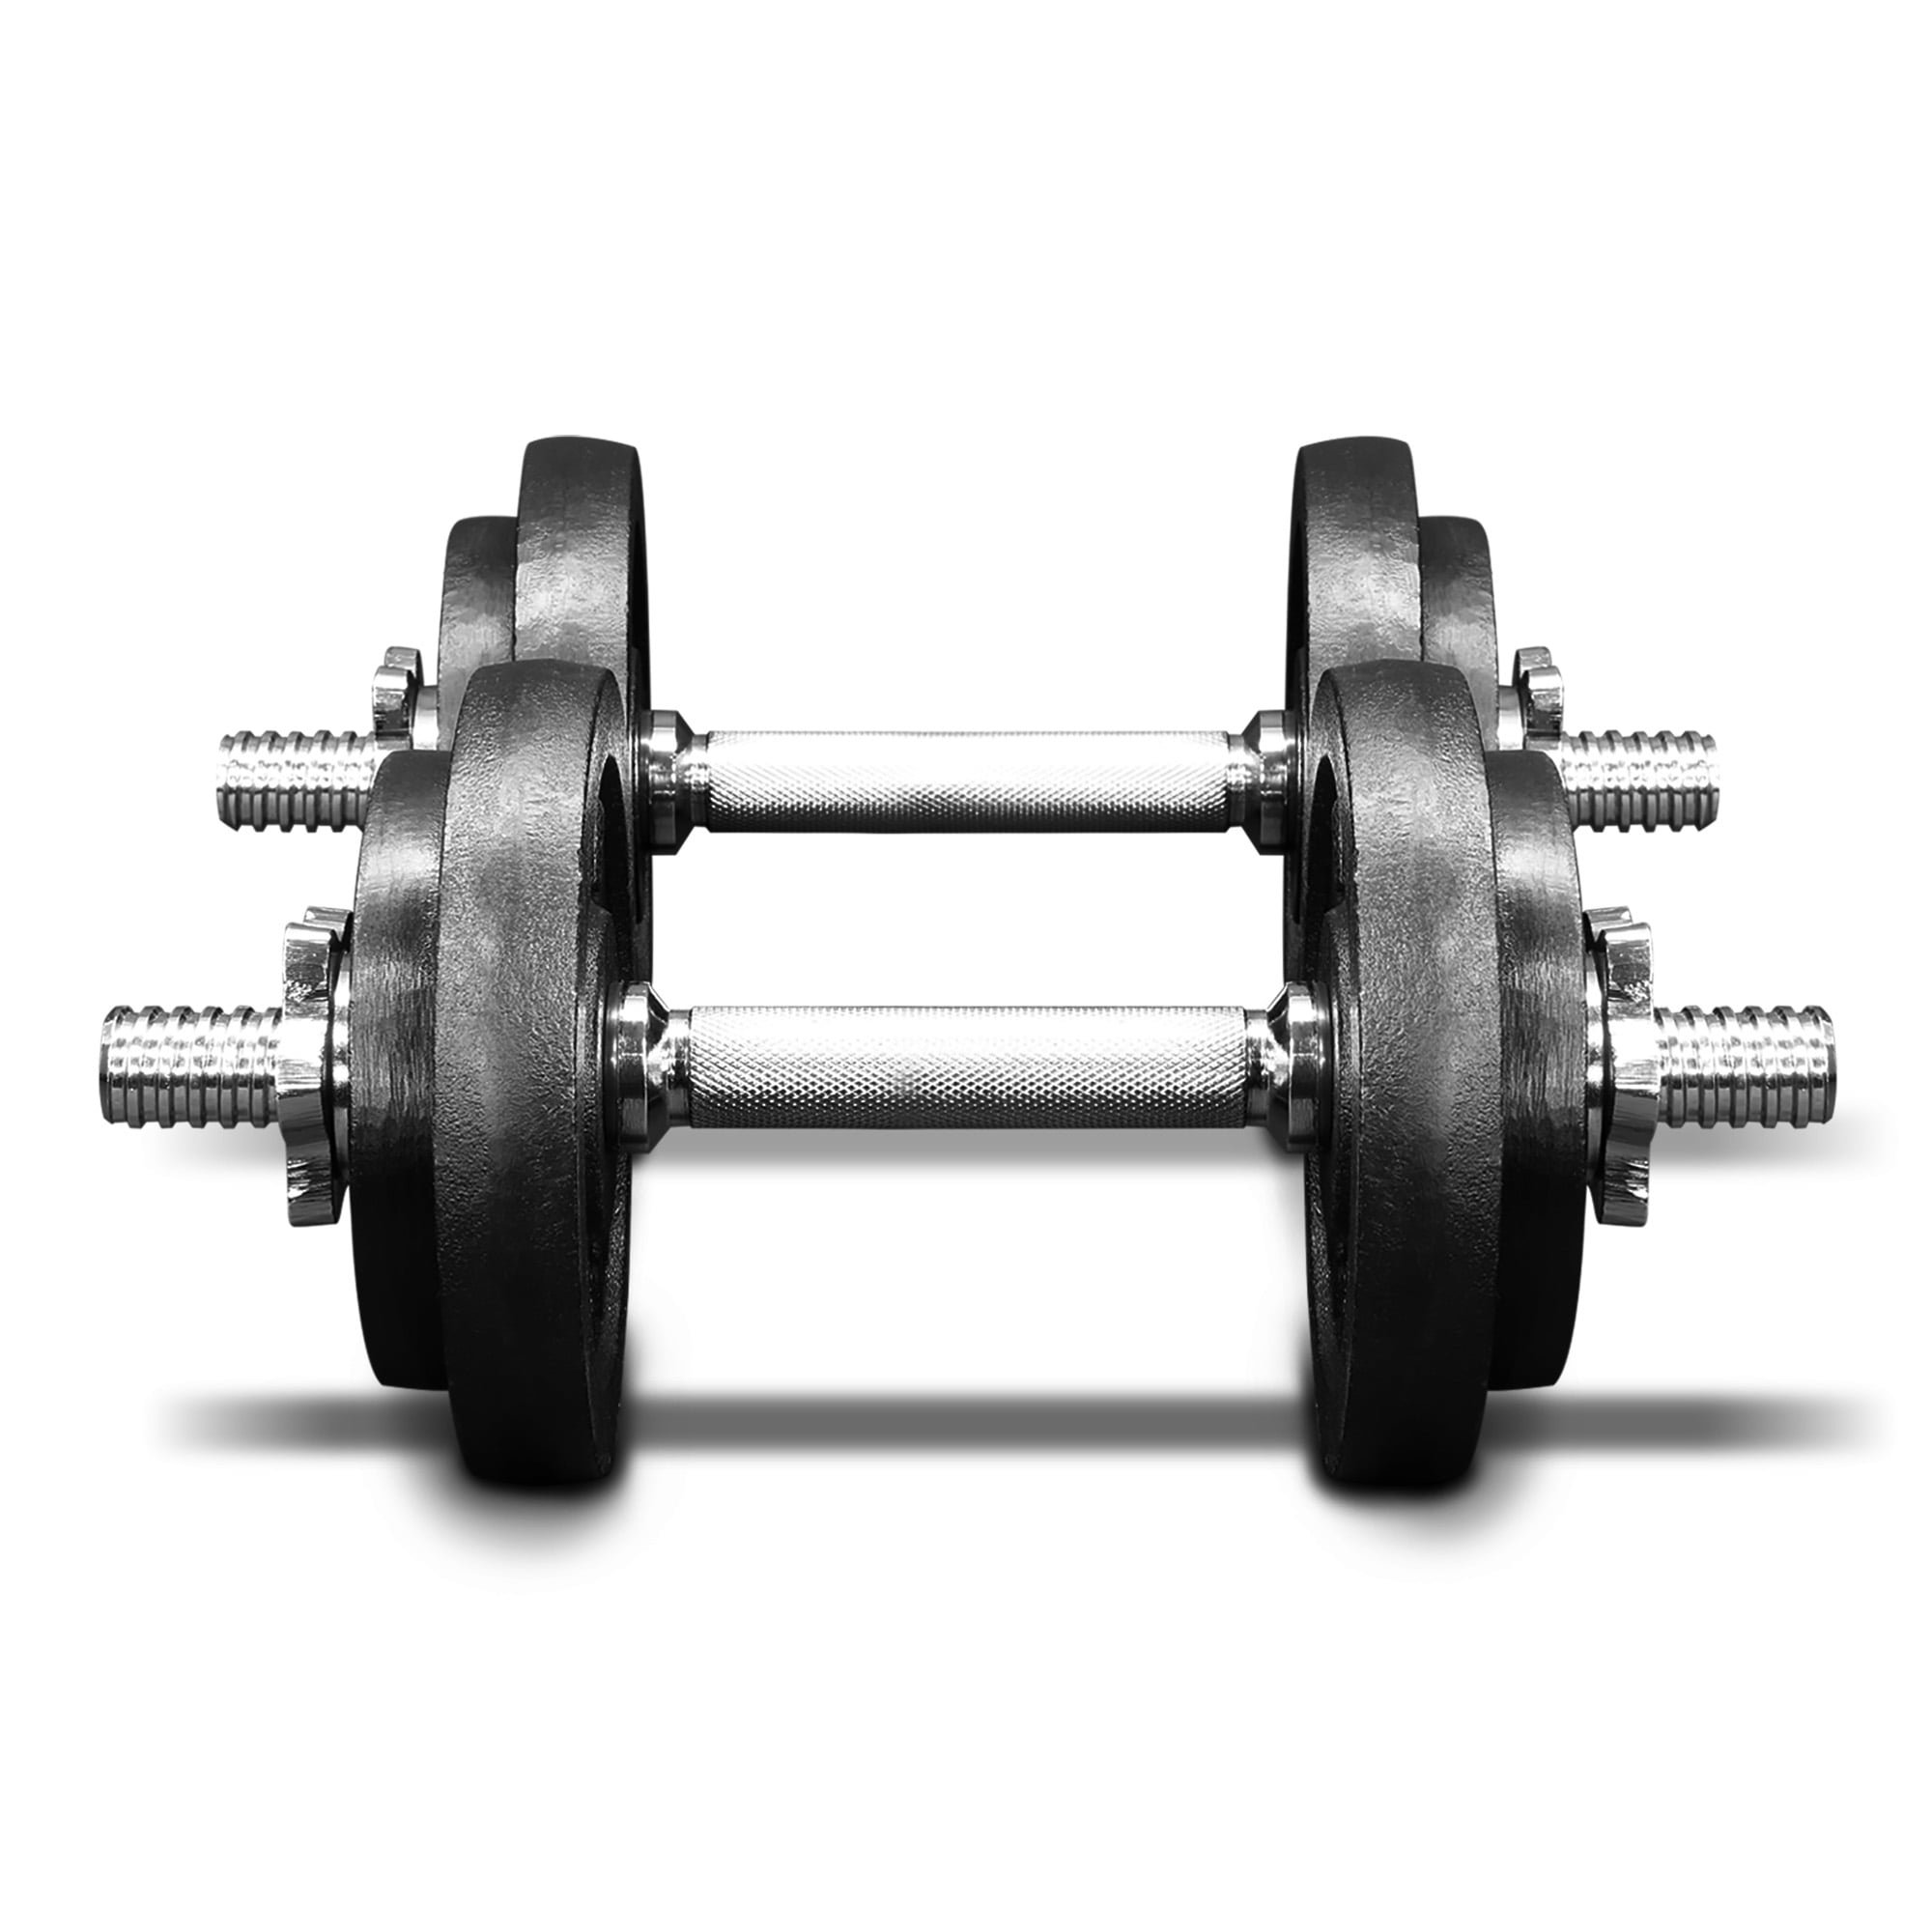 Yes4All D1IBZ Adjustable Cast Iron Dumbbells for sale online 60lbs 